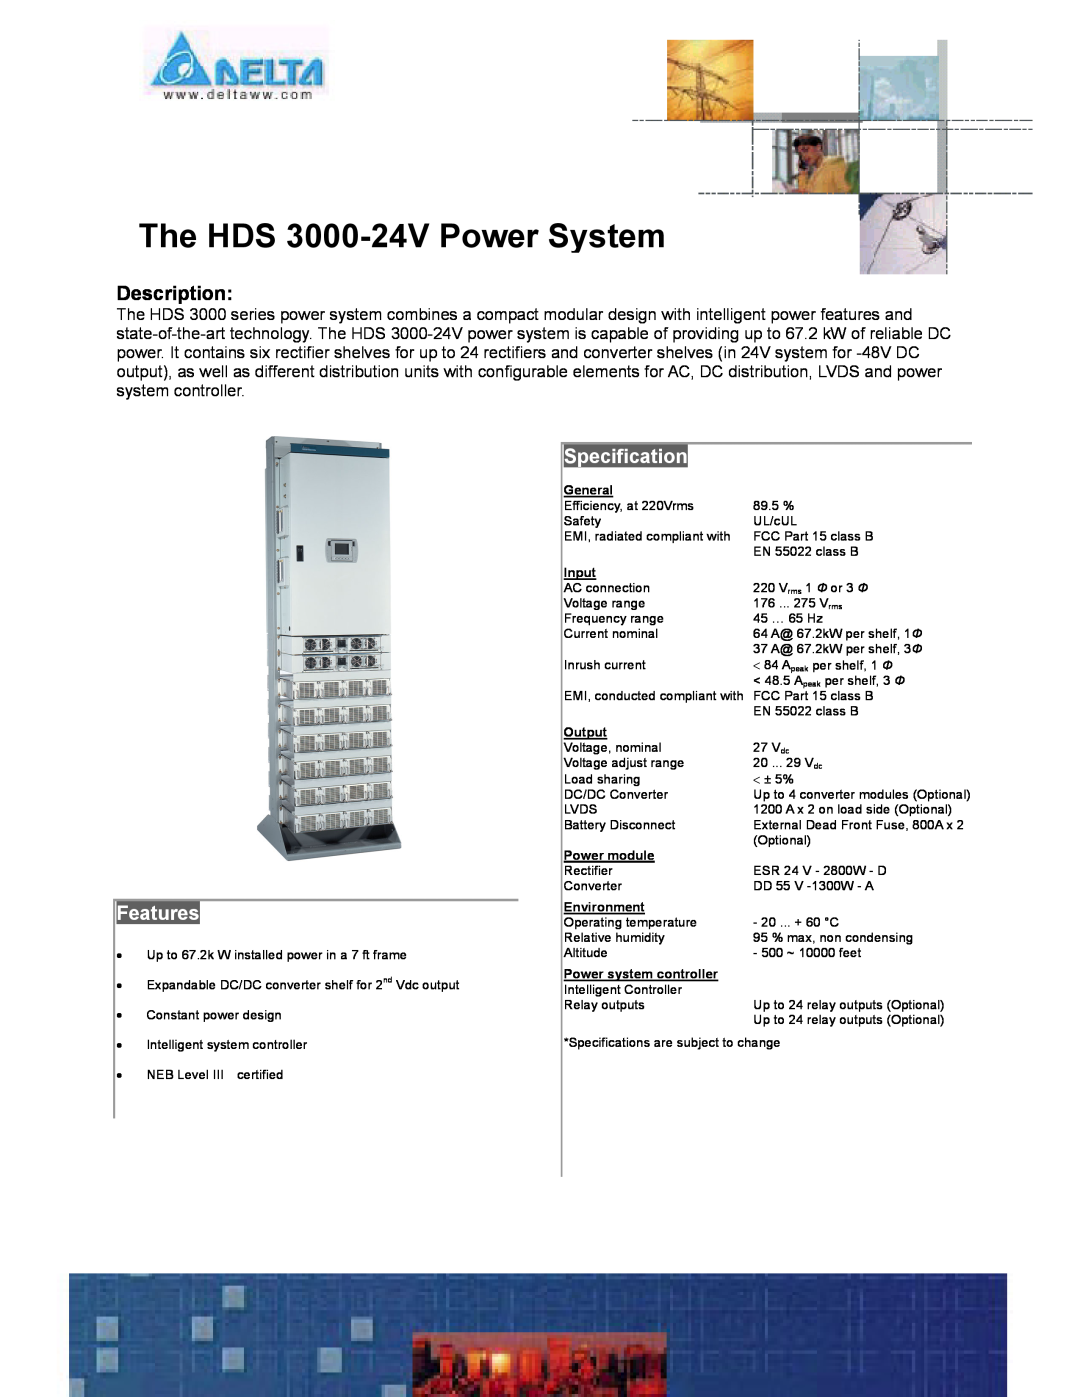 Delta specifications The HDS 3000-24V Power System, Description, Features, Specification, General, Input, Output 